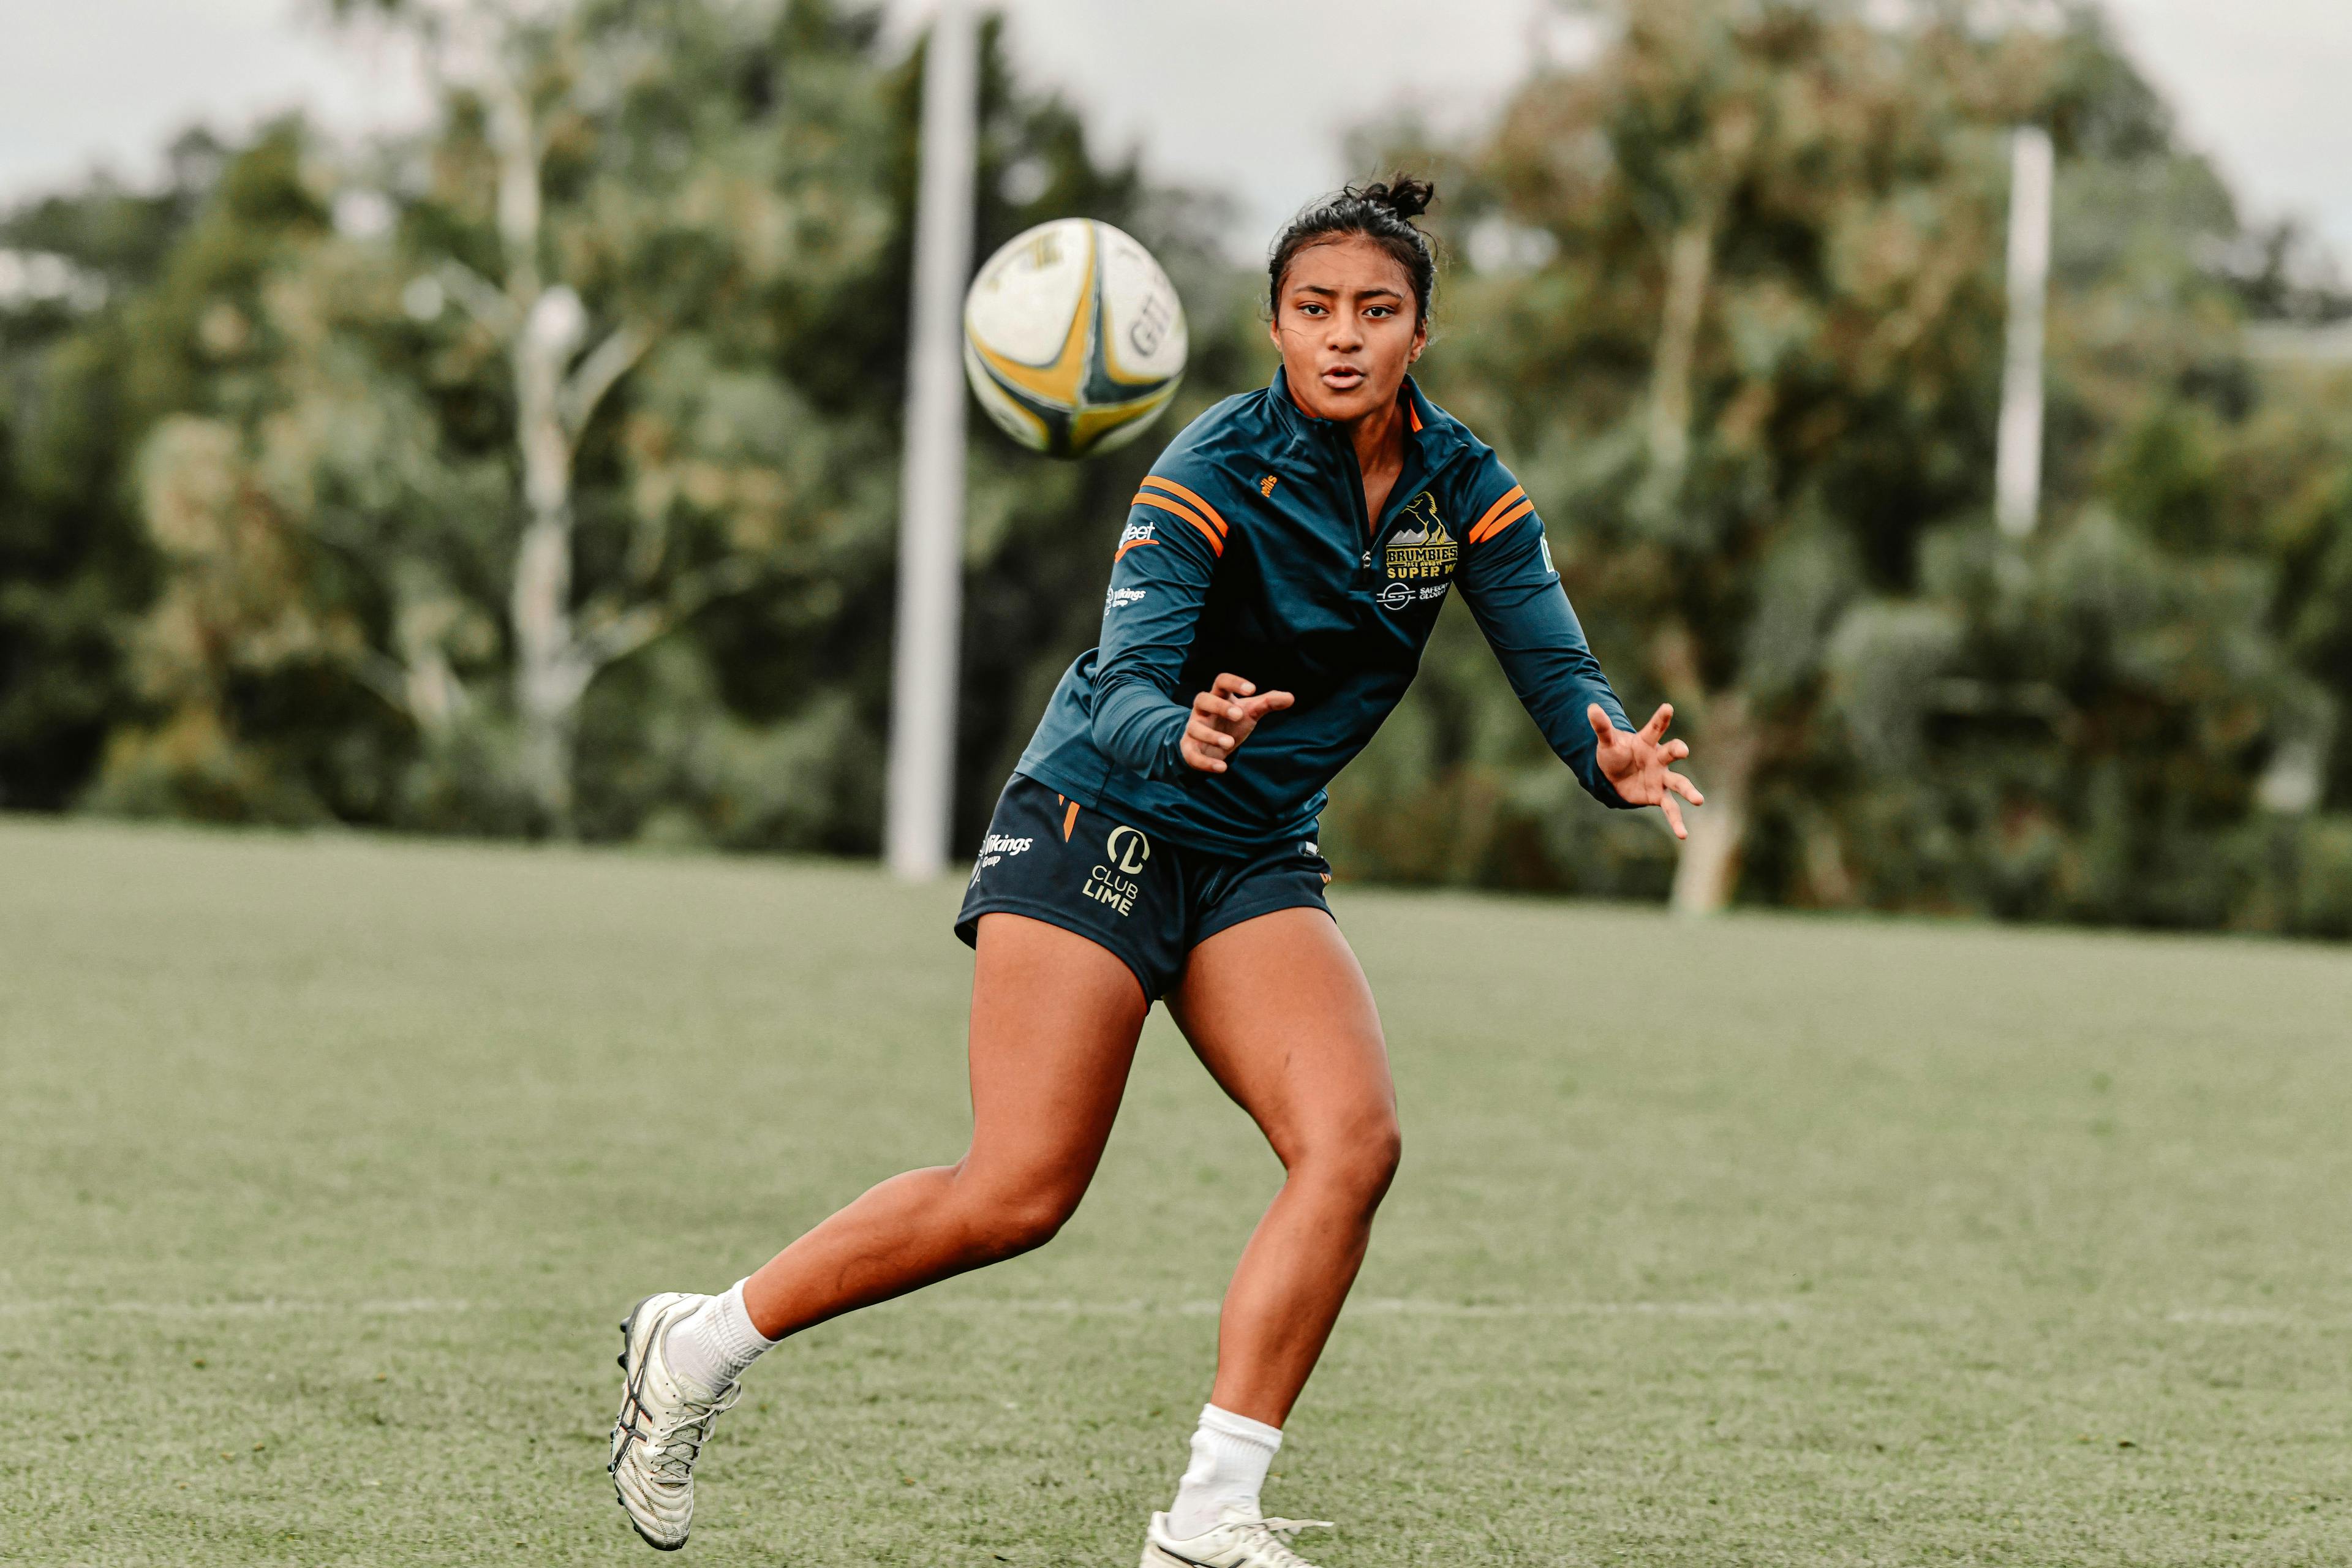 Wallaroos rising stars Faitala Moleka and Caitlyn Halse have been included in Australia's squad for August's Commonwealth Youth Games in Trinidad and Tobago. Photo: Brumbies Media